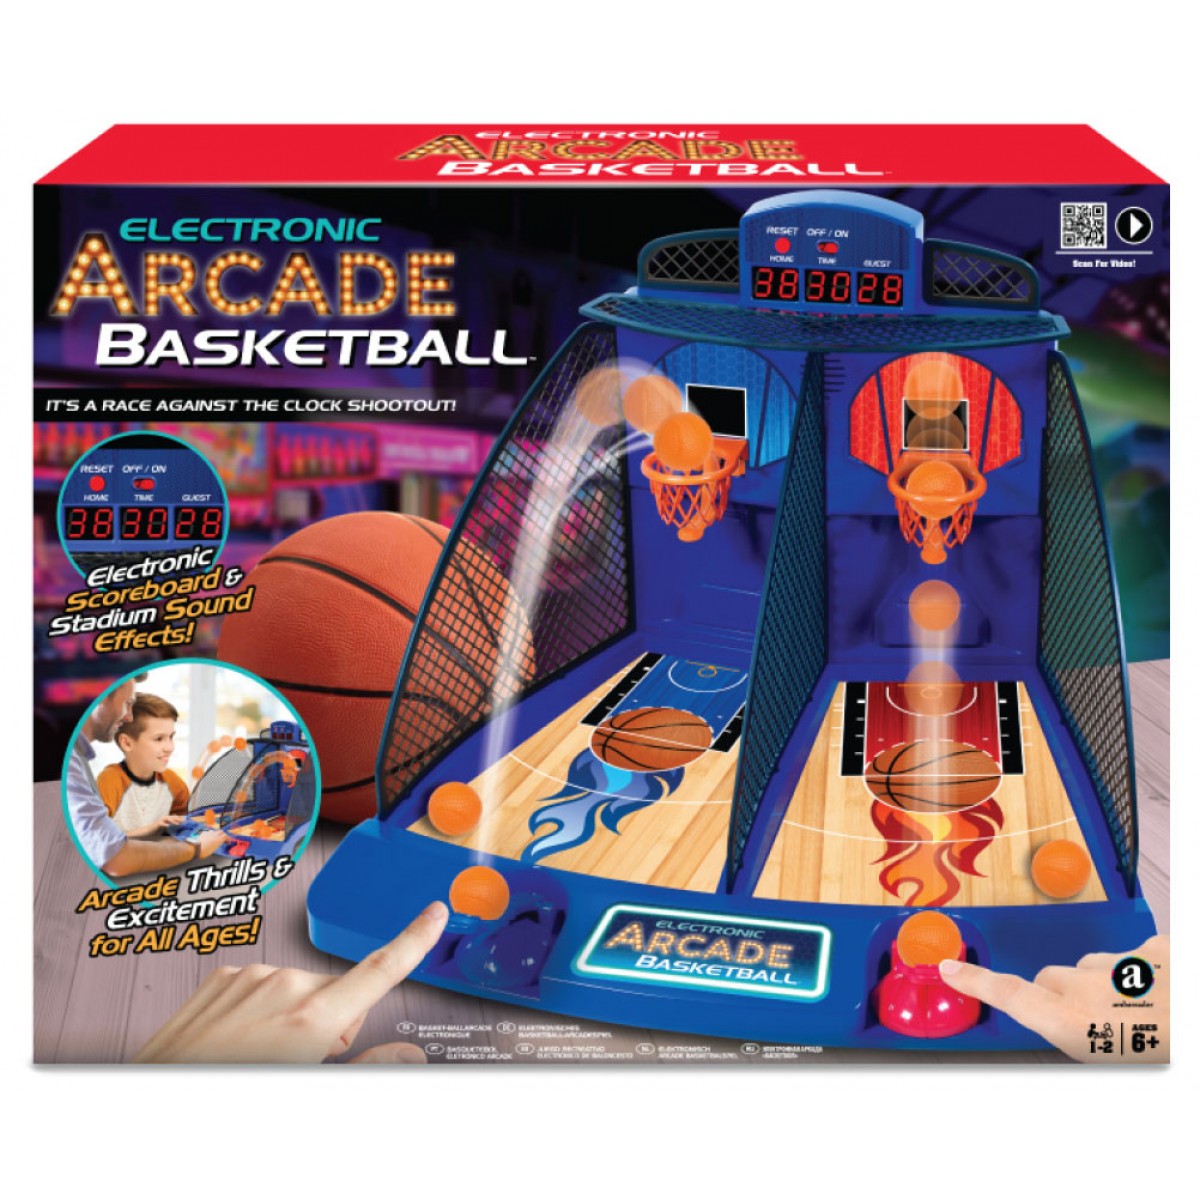 Electronic Arcade Basketball(GPD802) - Introduction (30 seconds